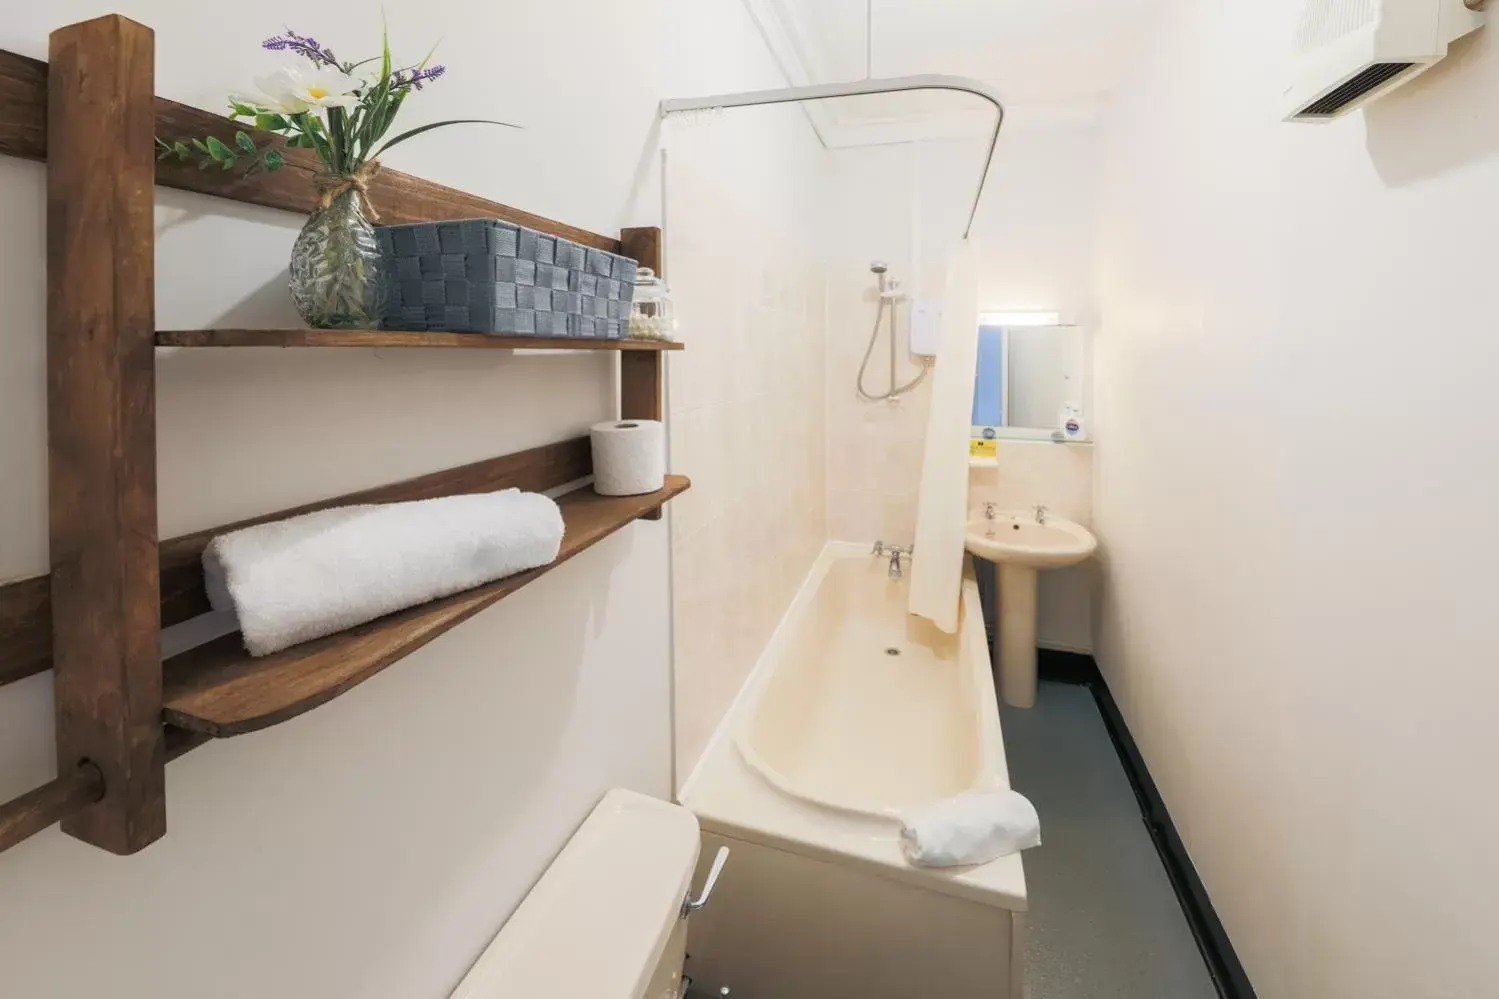 Bathroom in The Clee Hotel - Cleethorpes, Grimsby, Lincolnshire